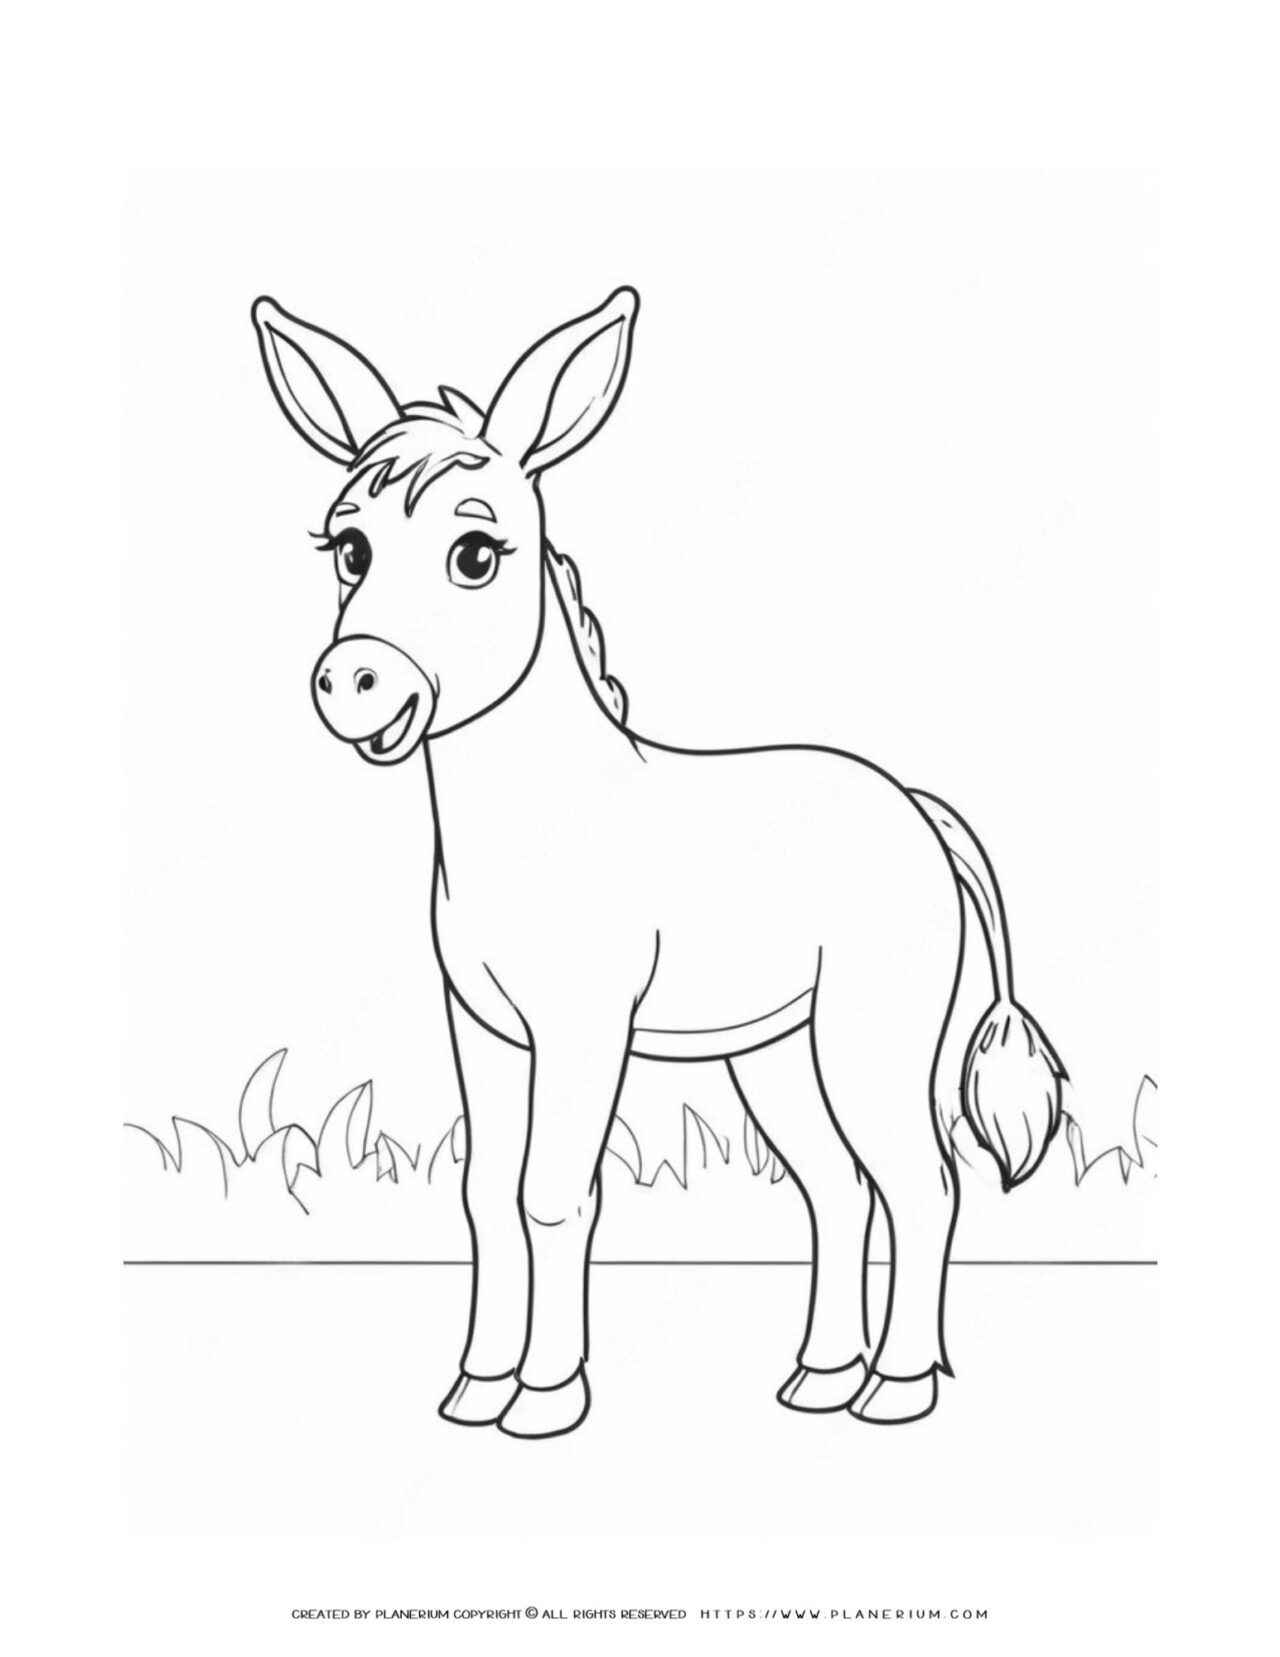 Cute-Little-Donkey-Standing-Simple-Coloring-Page